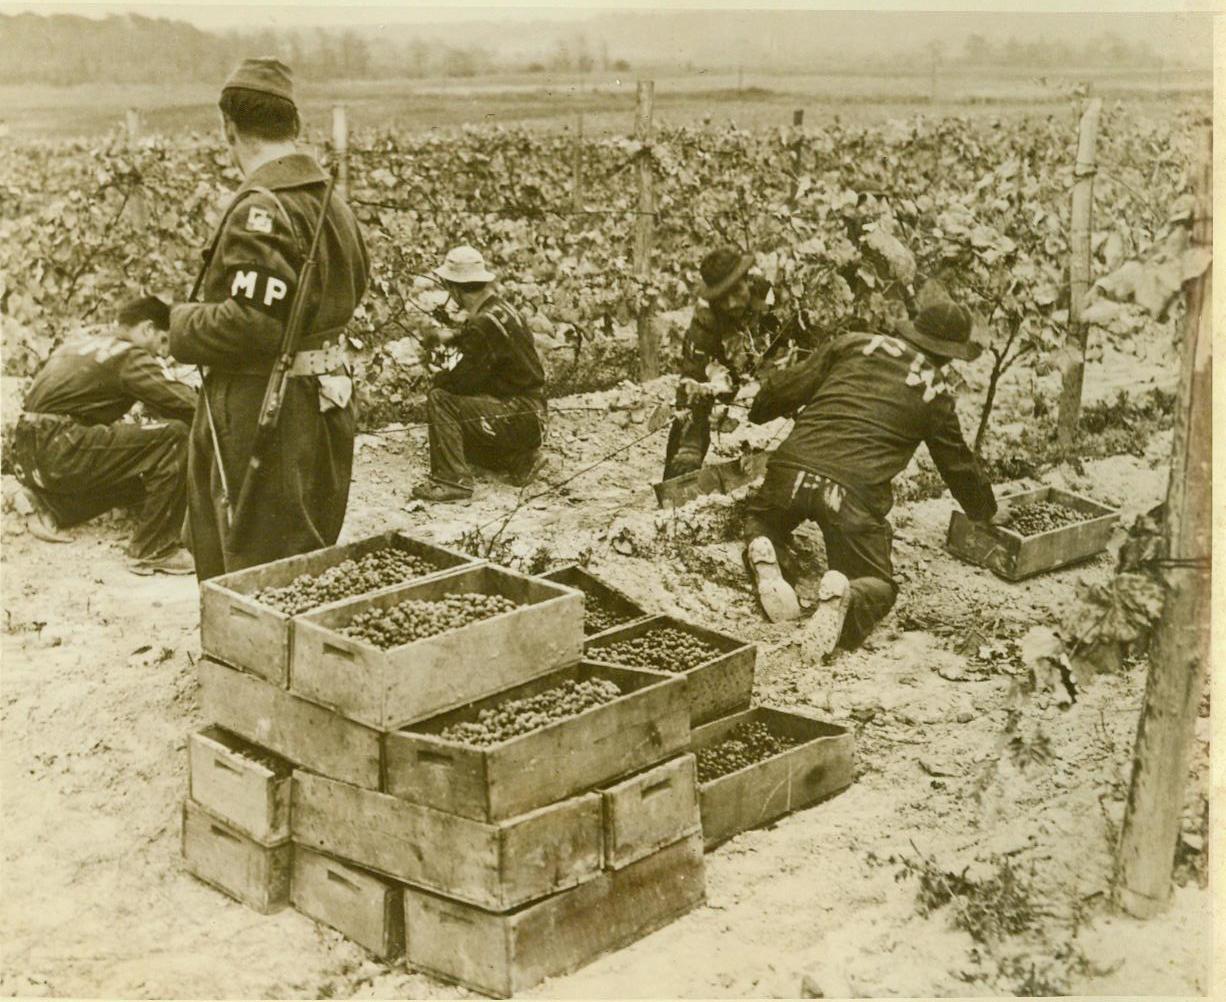 A Crop They Know Well, 10/25/1943. Fredonia, N.Y. – The Italian Prisoners of War, helping harvest grapes on the William Russo farm near Fredonia, N.Y., receive 80 cents a day for their labor as compared with their pay of 26 cnts per day in the Fascist Army. From his earnings, each prisoner receives a credit of $3.00 per month at the Camp Canteen, and the rest will be handed to him when he is freed by Allied victory. 10/25/43 ACME;